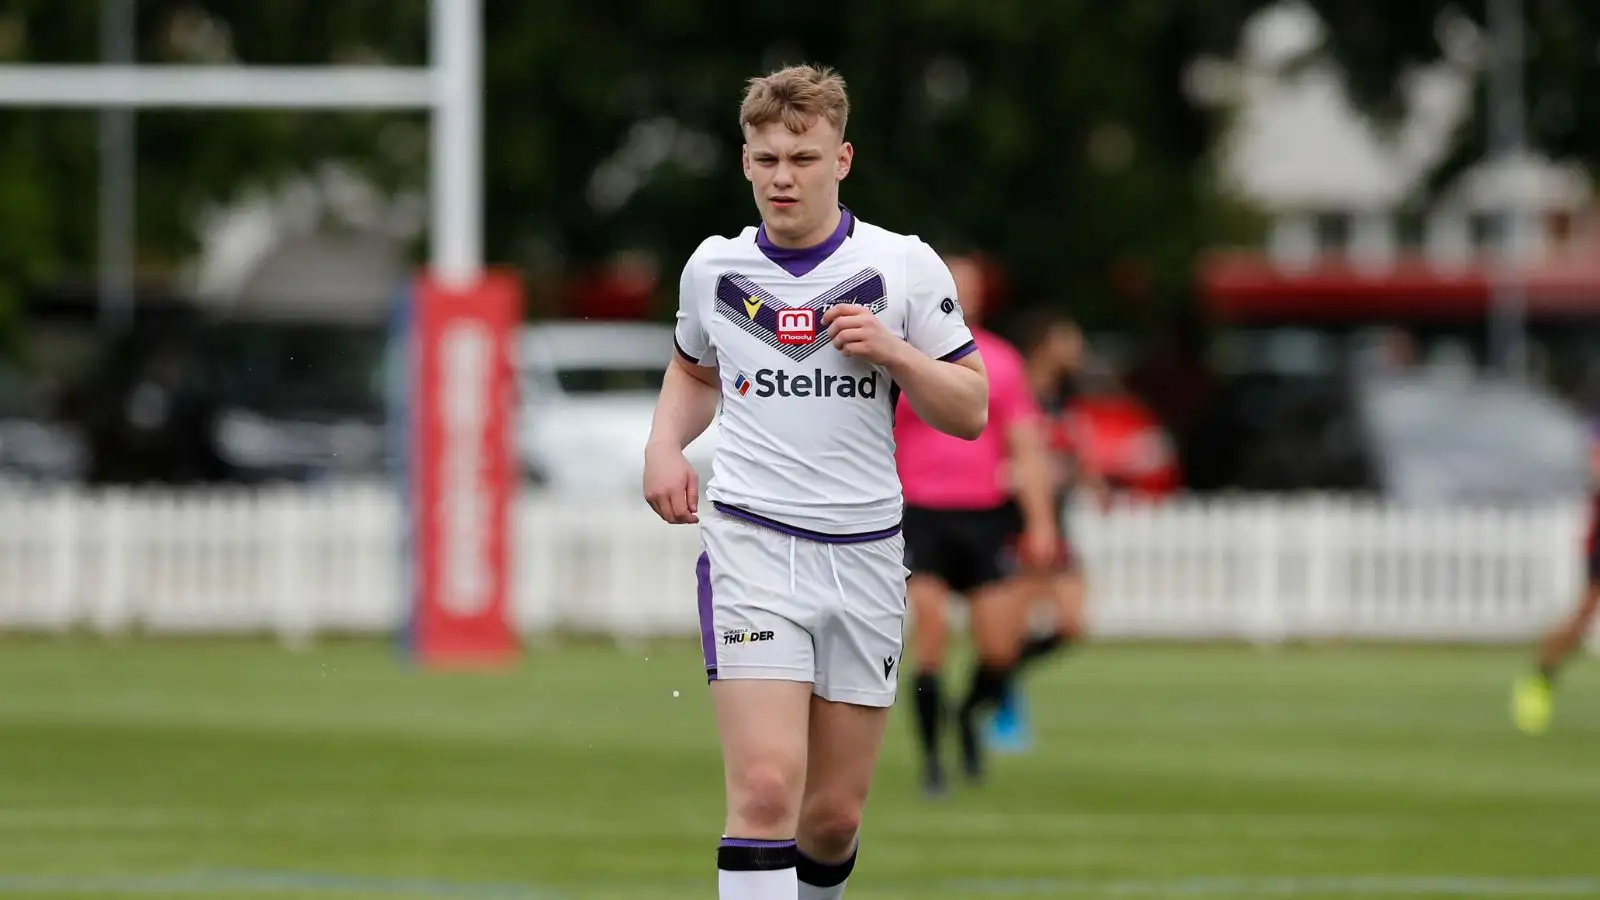 Former Wigan Warriors youngster joins Oldham on trial with aim of securing permanent contract